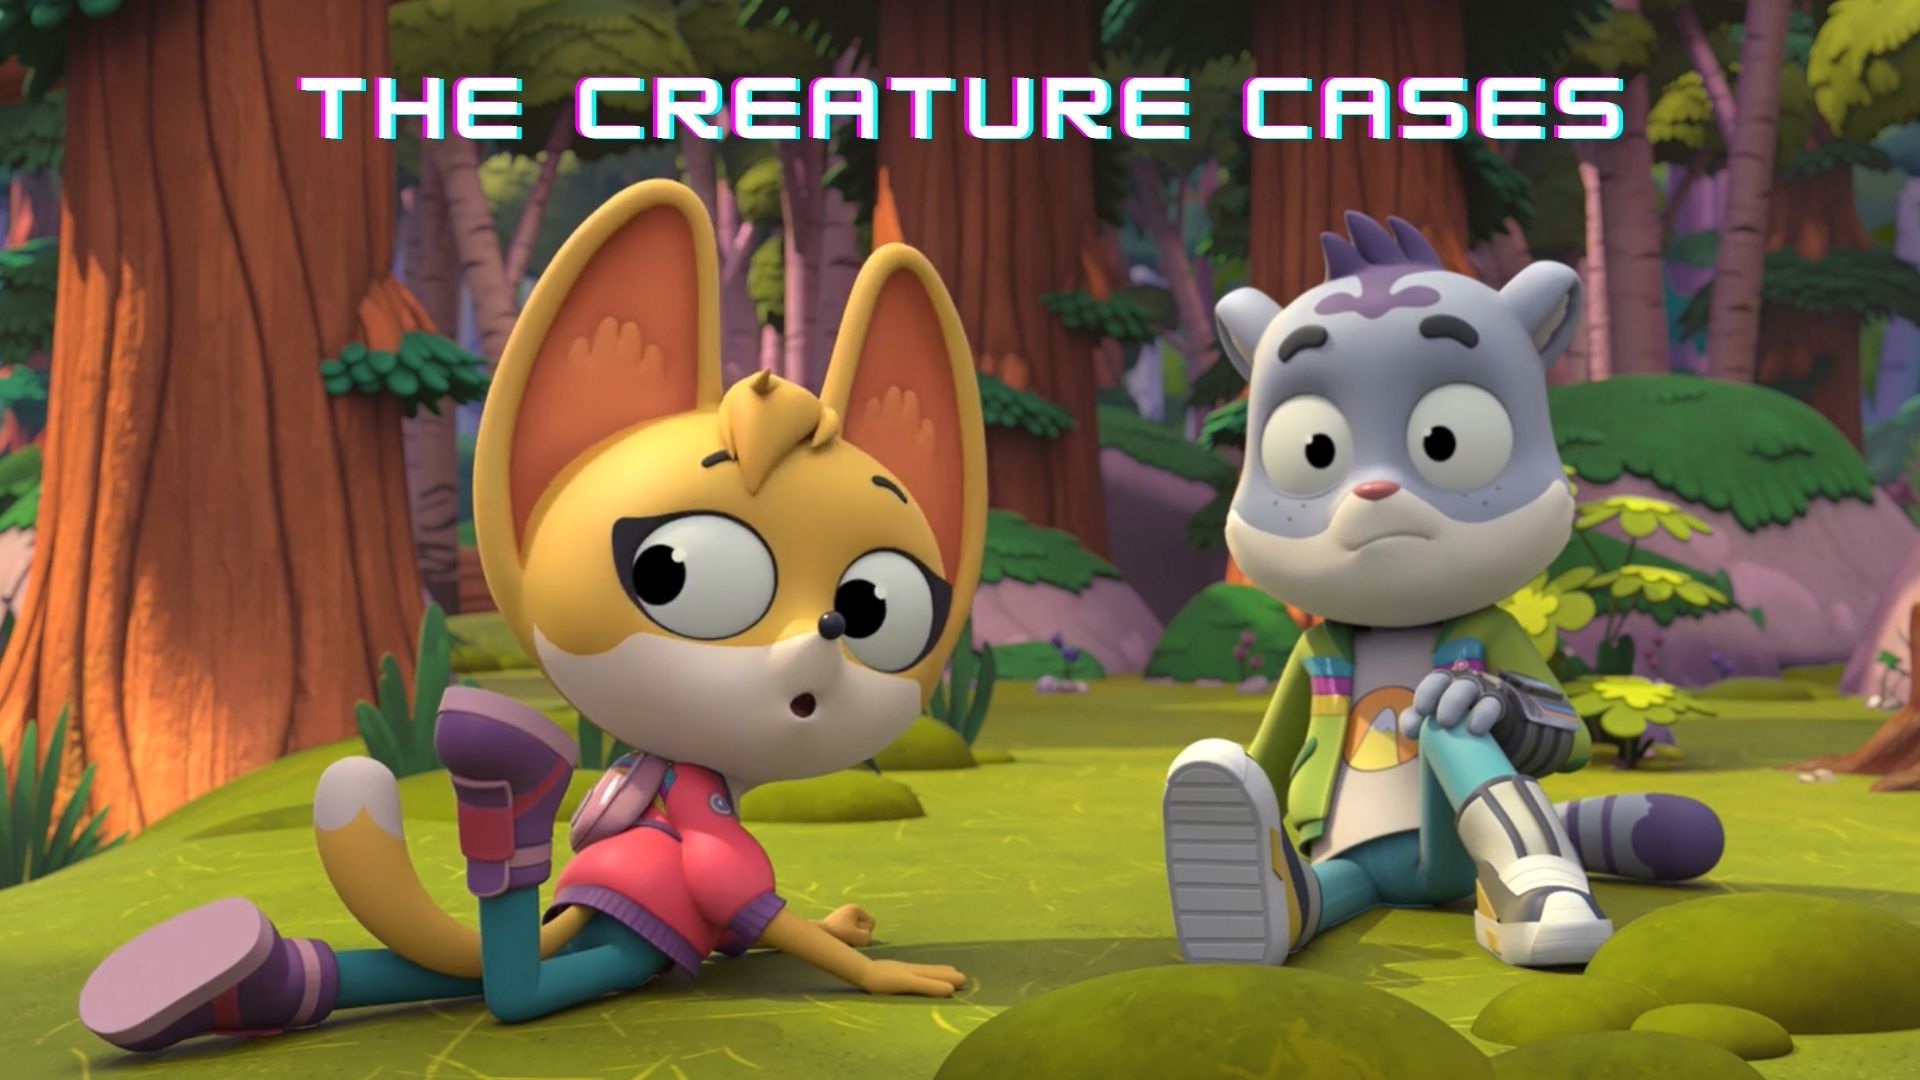 The Creature Cases Wallpaper and Images